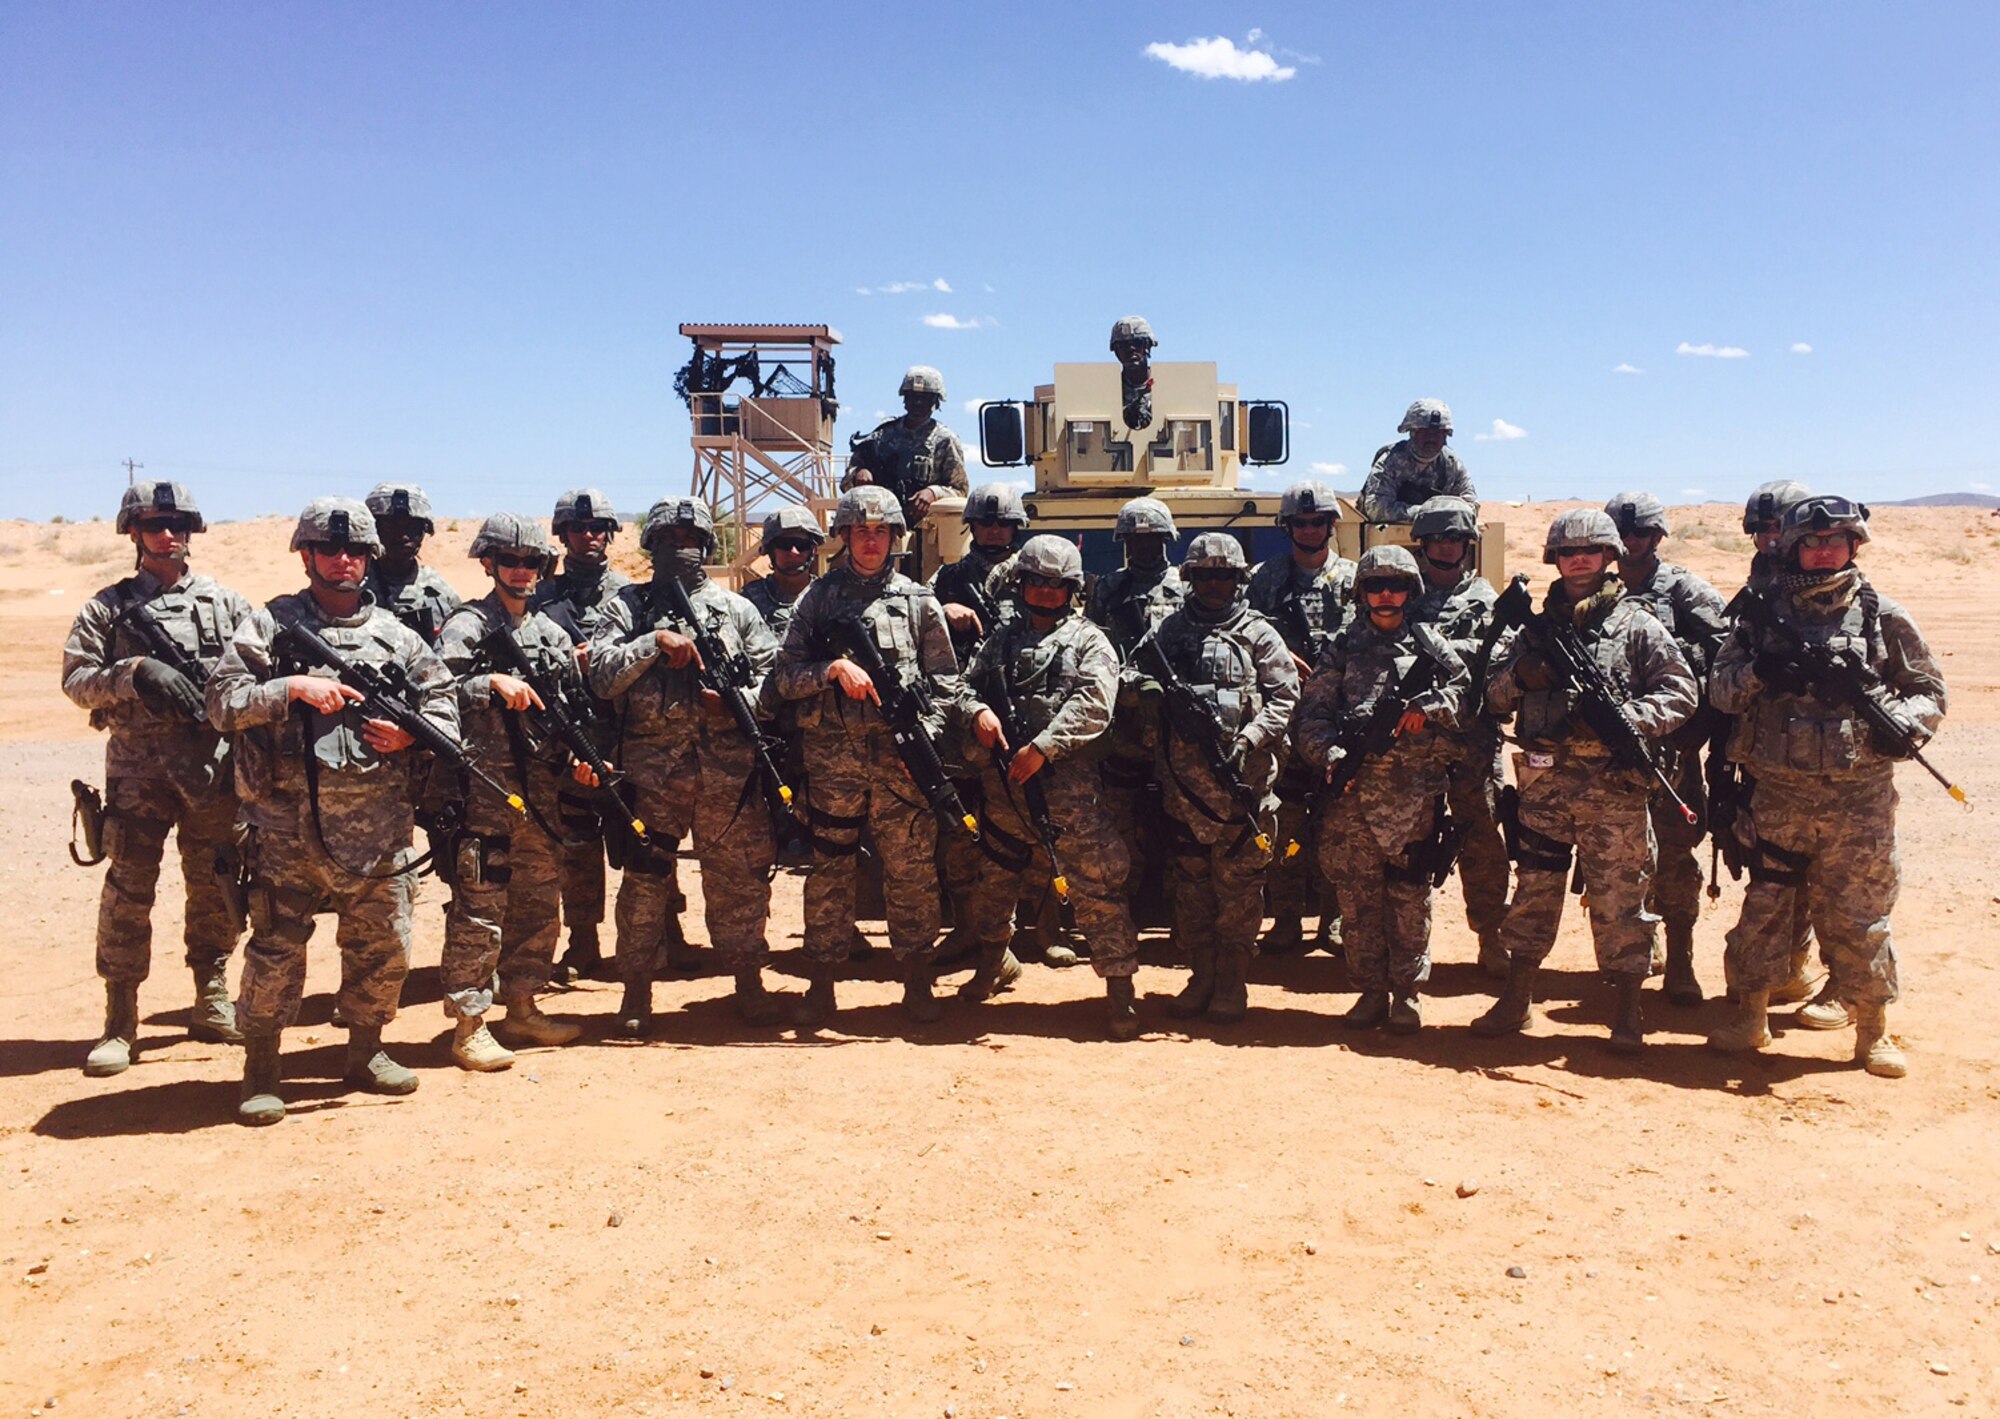 U.S. Air Force Airmen assigned to the 192nd Security Forces Squadron participate in Desert Defender Combat Readiness Training at the Regional Training Center, Fort Bliss, Texas, April 2015. SFS Airmen tested their abilities to prepare for potential threats in a simulated combat environment prior to deploying. (U.S. Air Force courtesy photo)